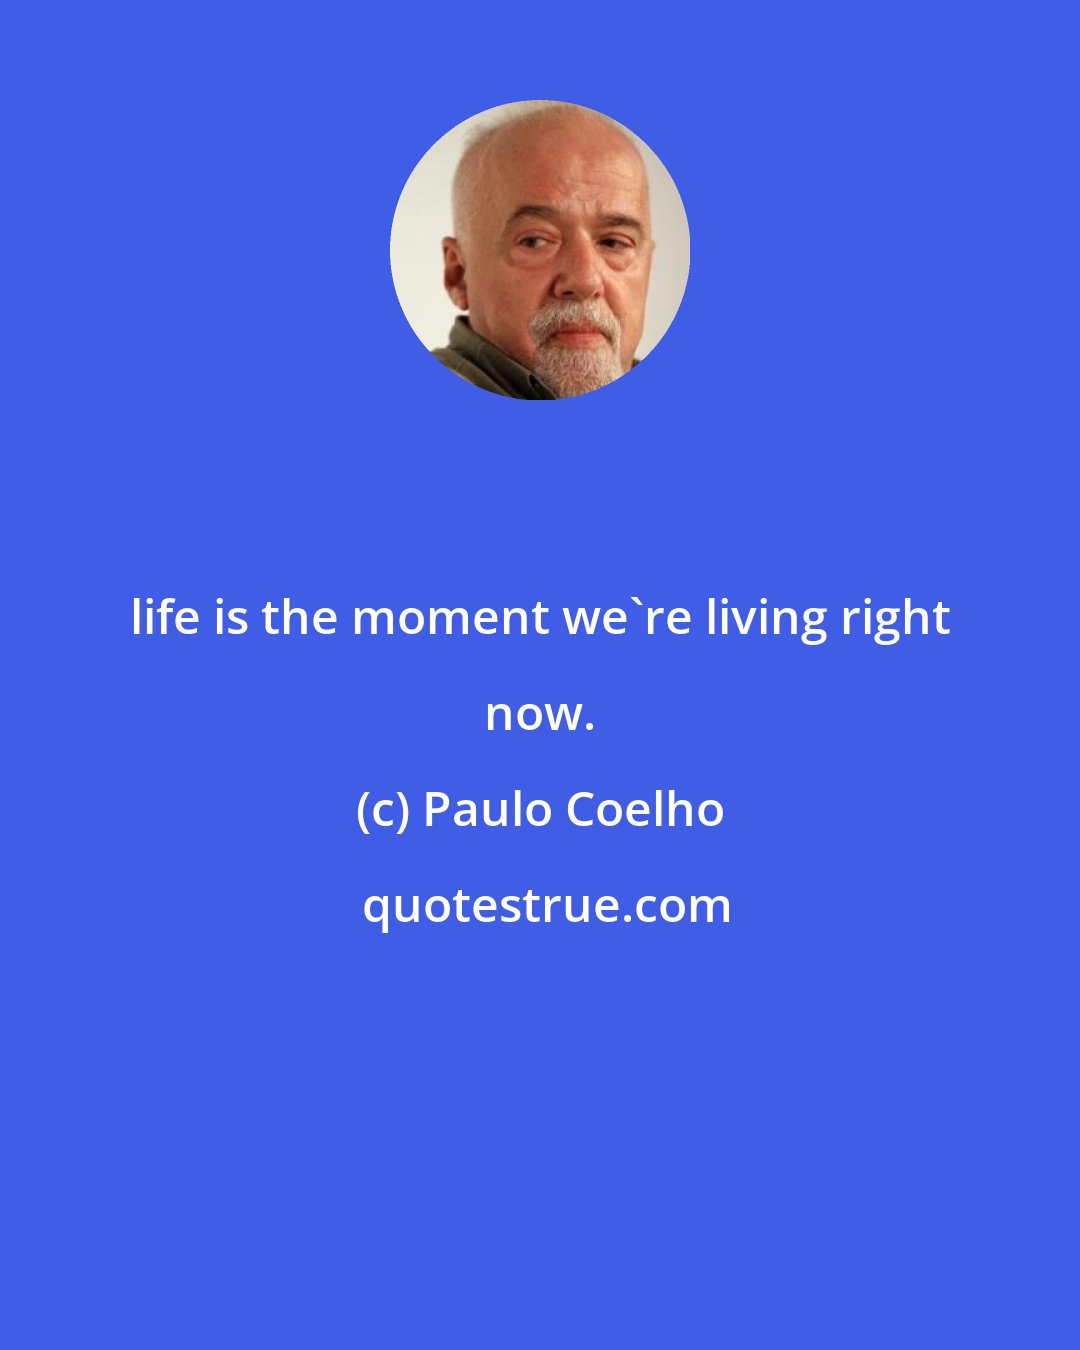 Paulo Coelho: life is the moment we're living right now.